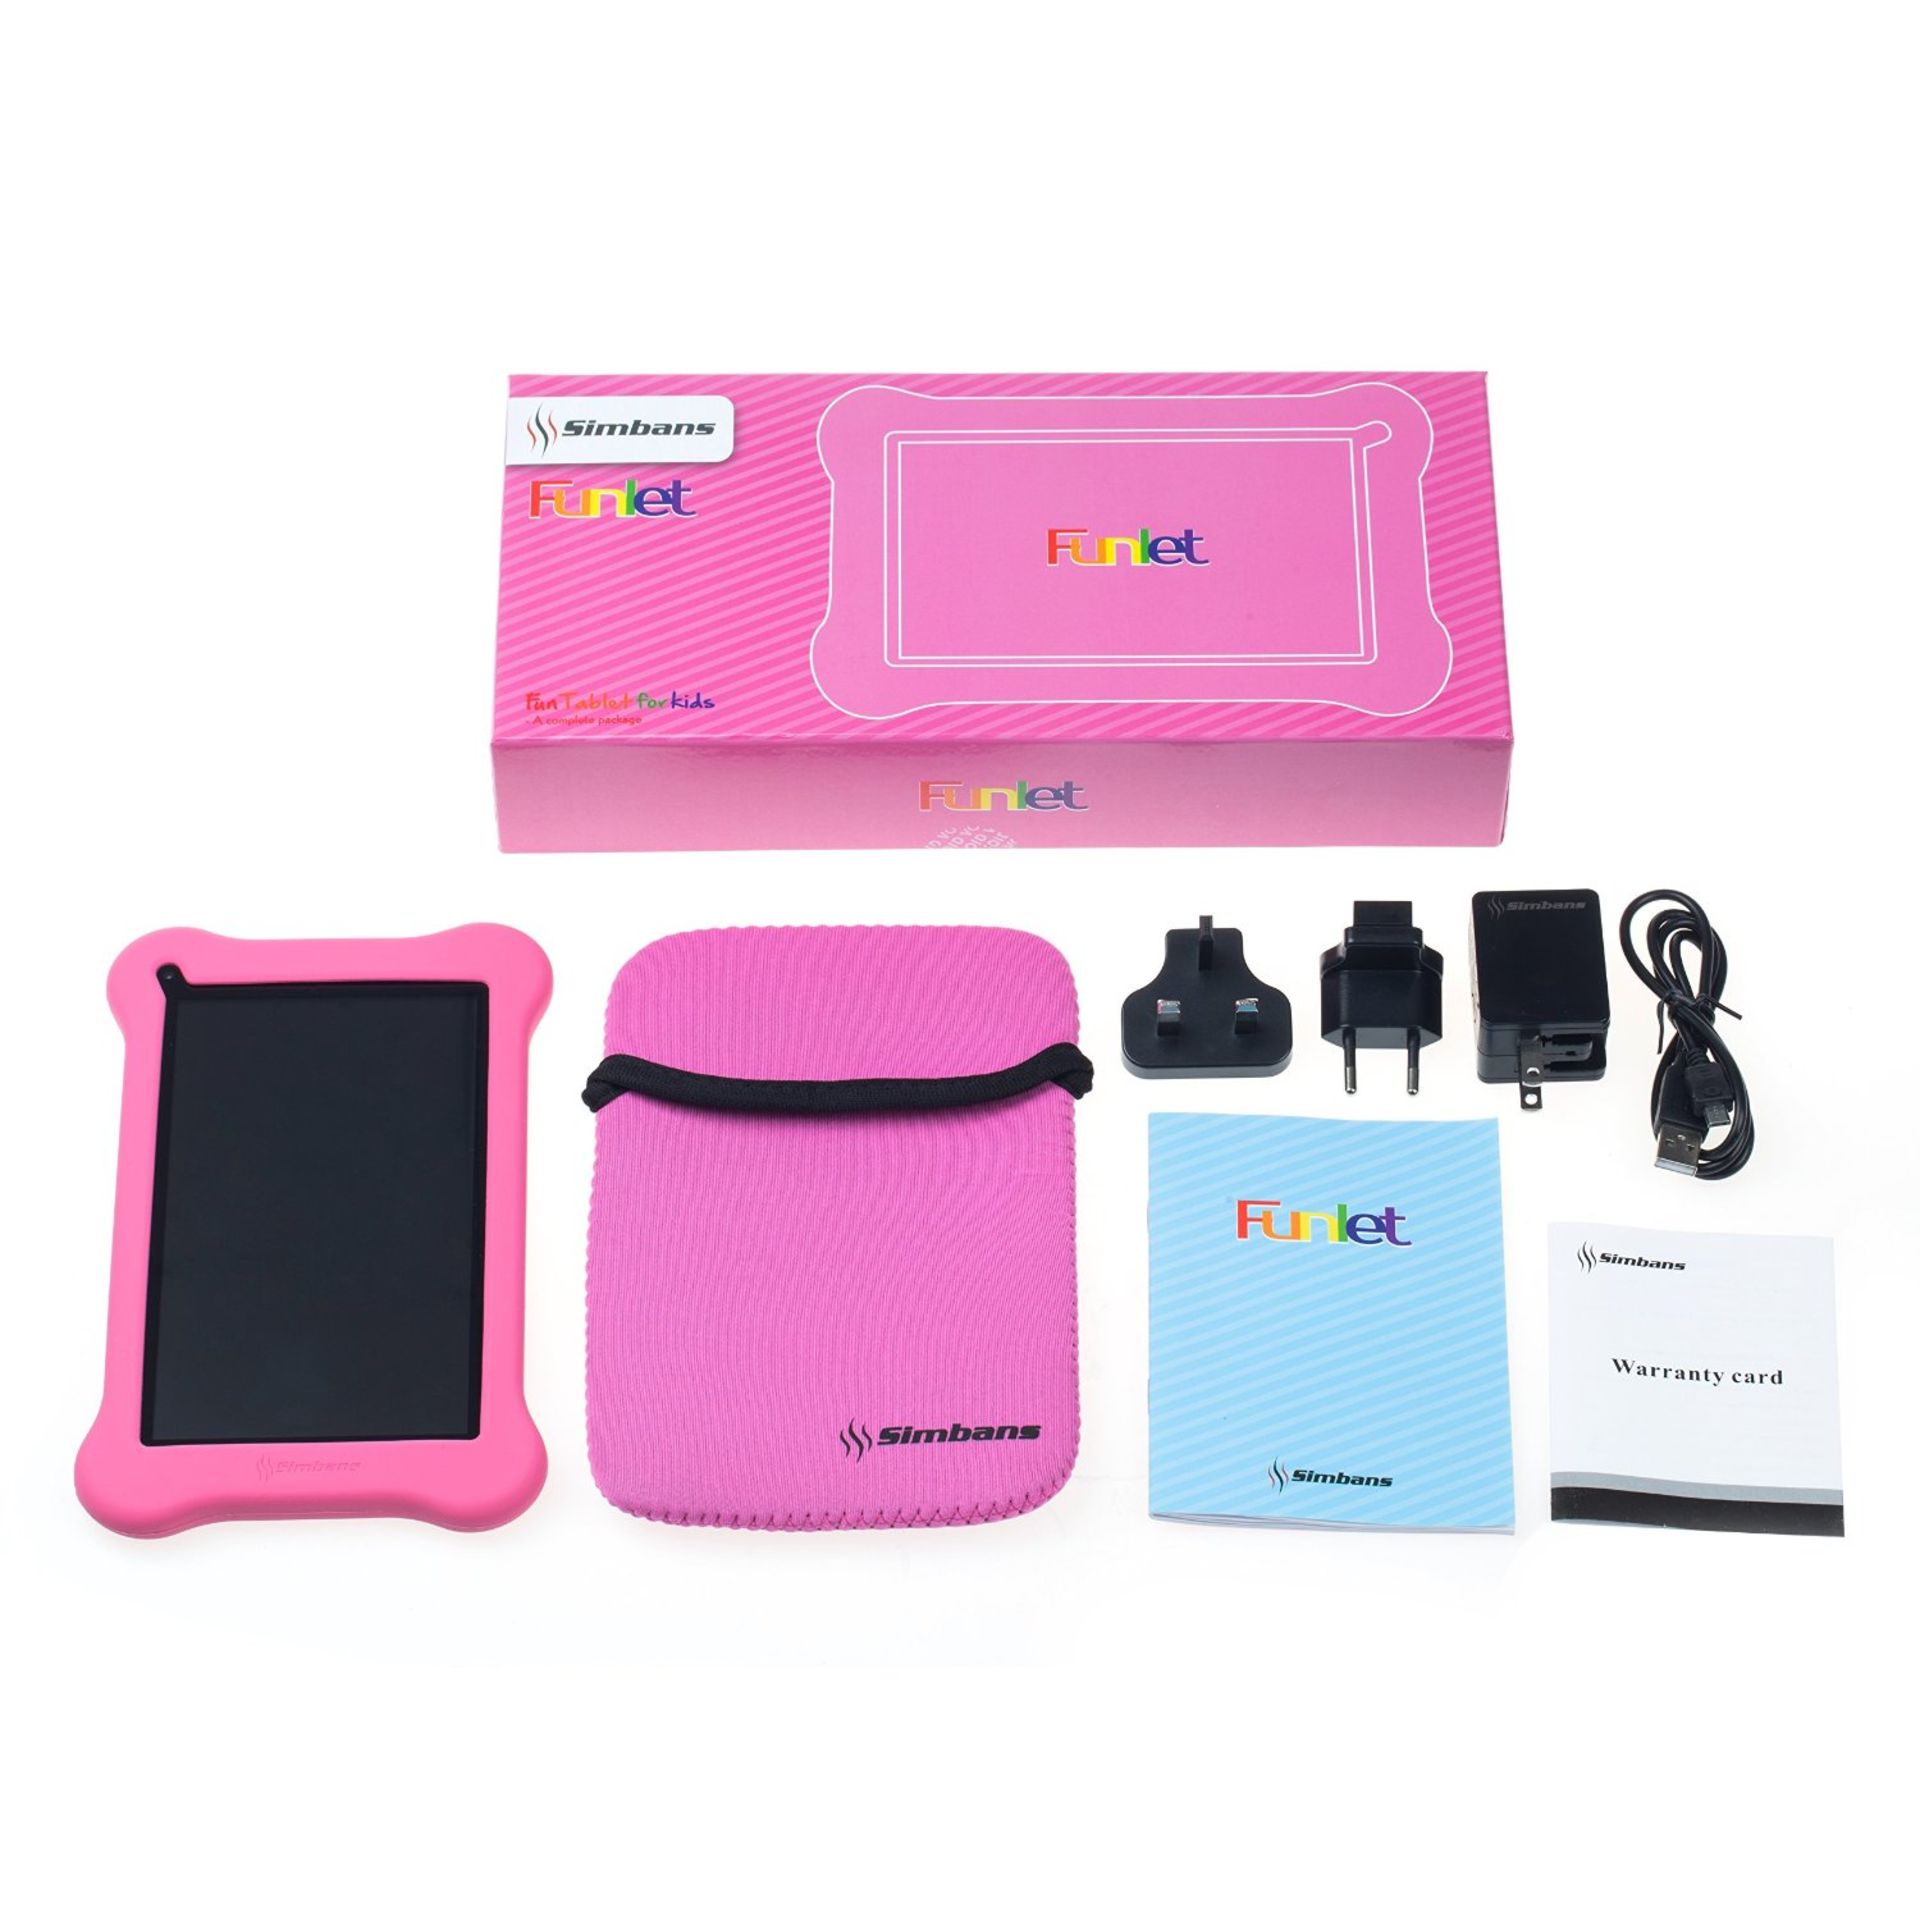 V *TRADE QTY* Grade A Funlet Pink 7 inch Tablet with Protective Case and Tablet Sleeve - IPS - Image 2 of 2